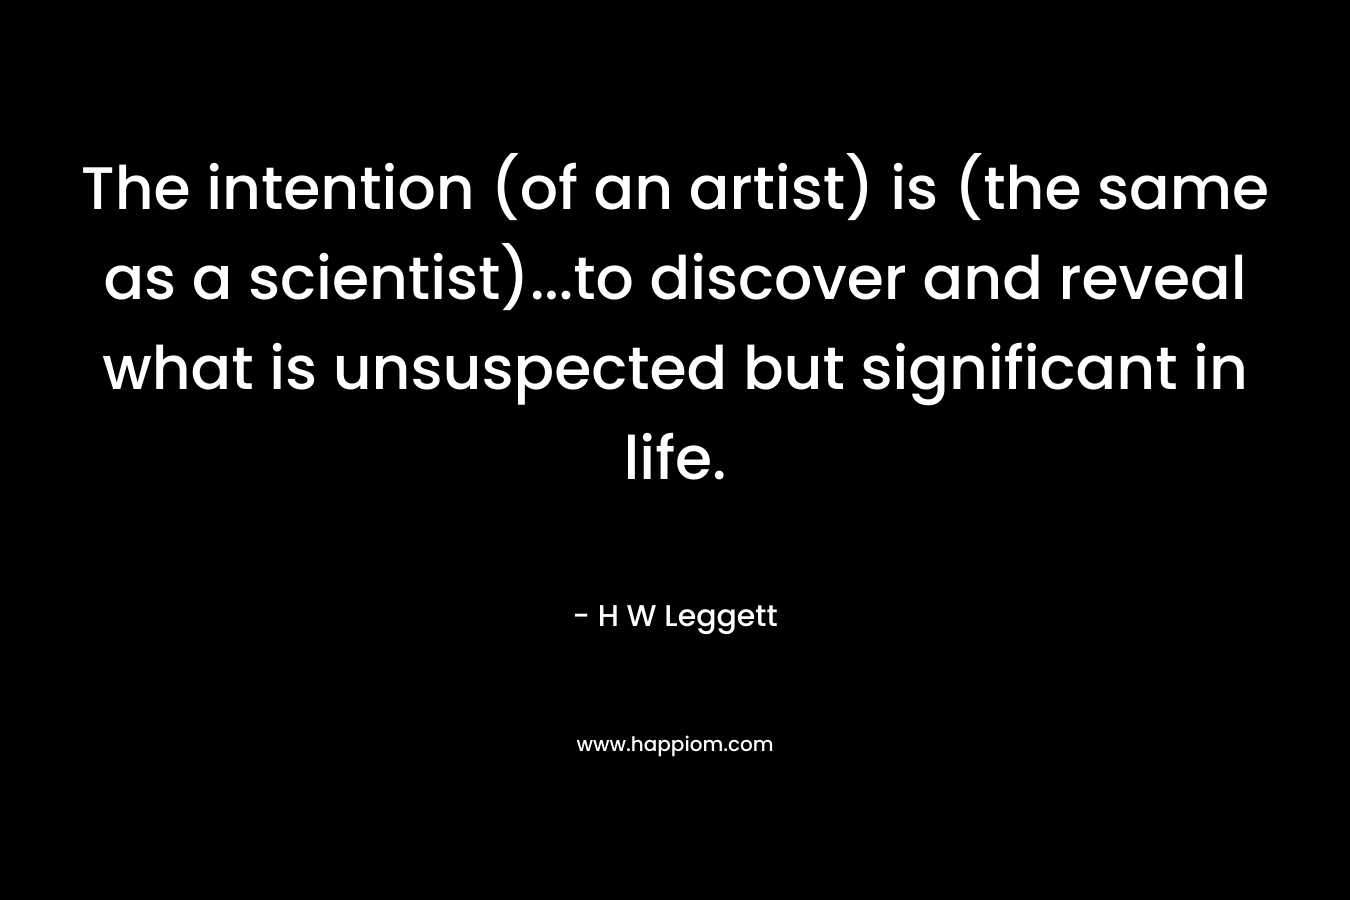 The intention (of an artist) is (the same as a scientist)...to discover and reveal what is unsuspected but significant in life.